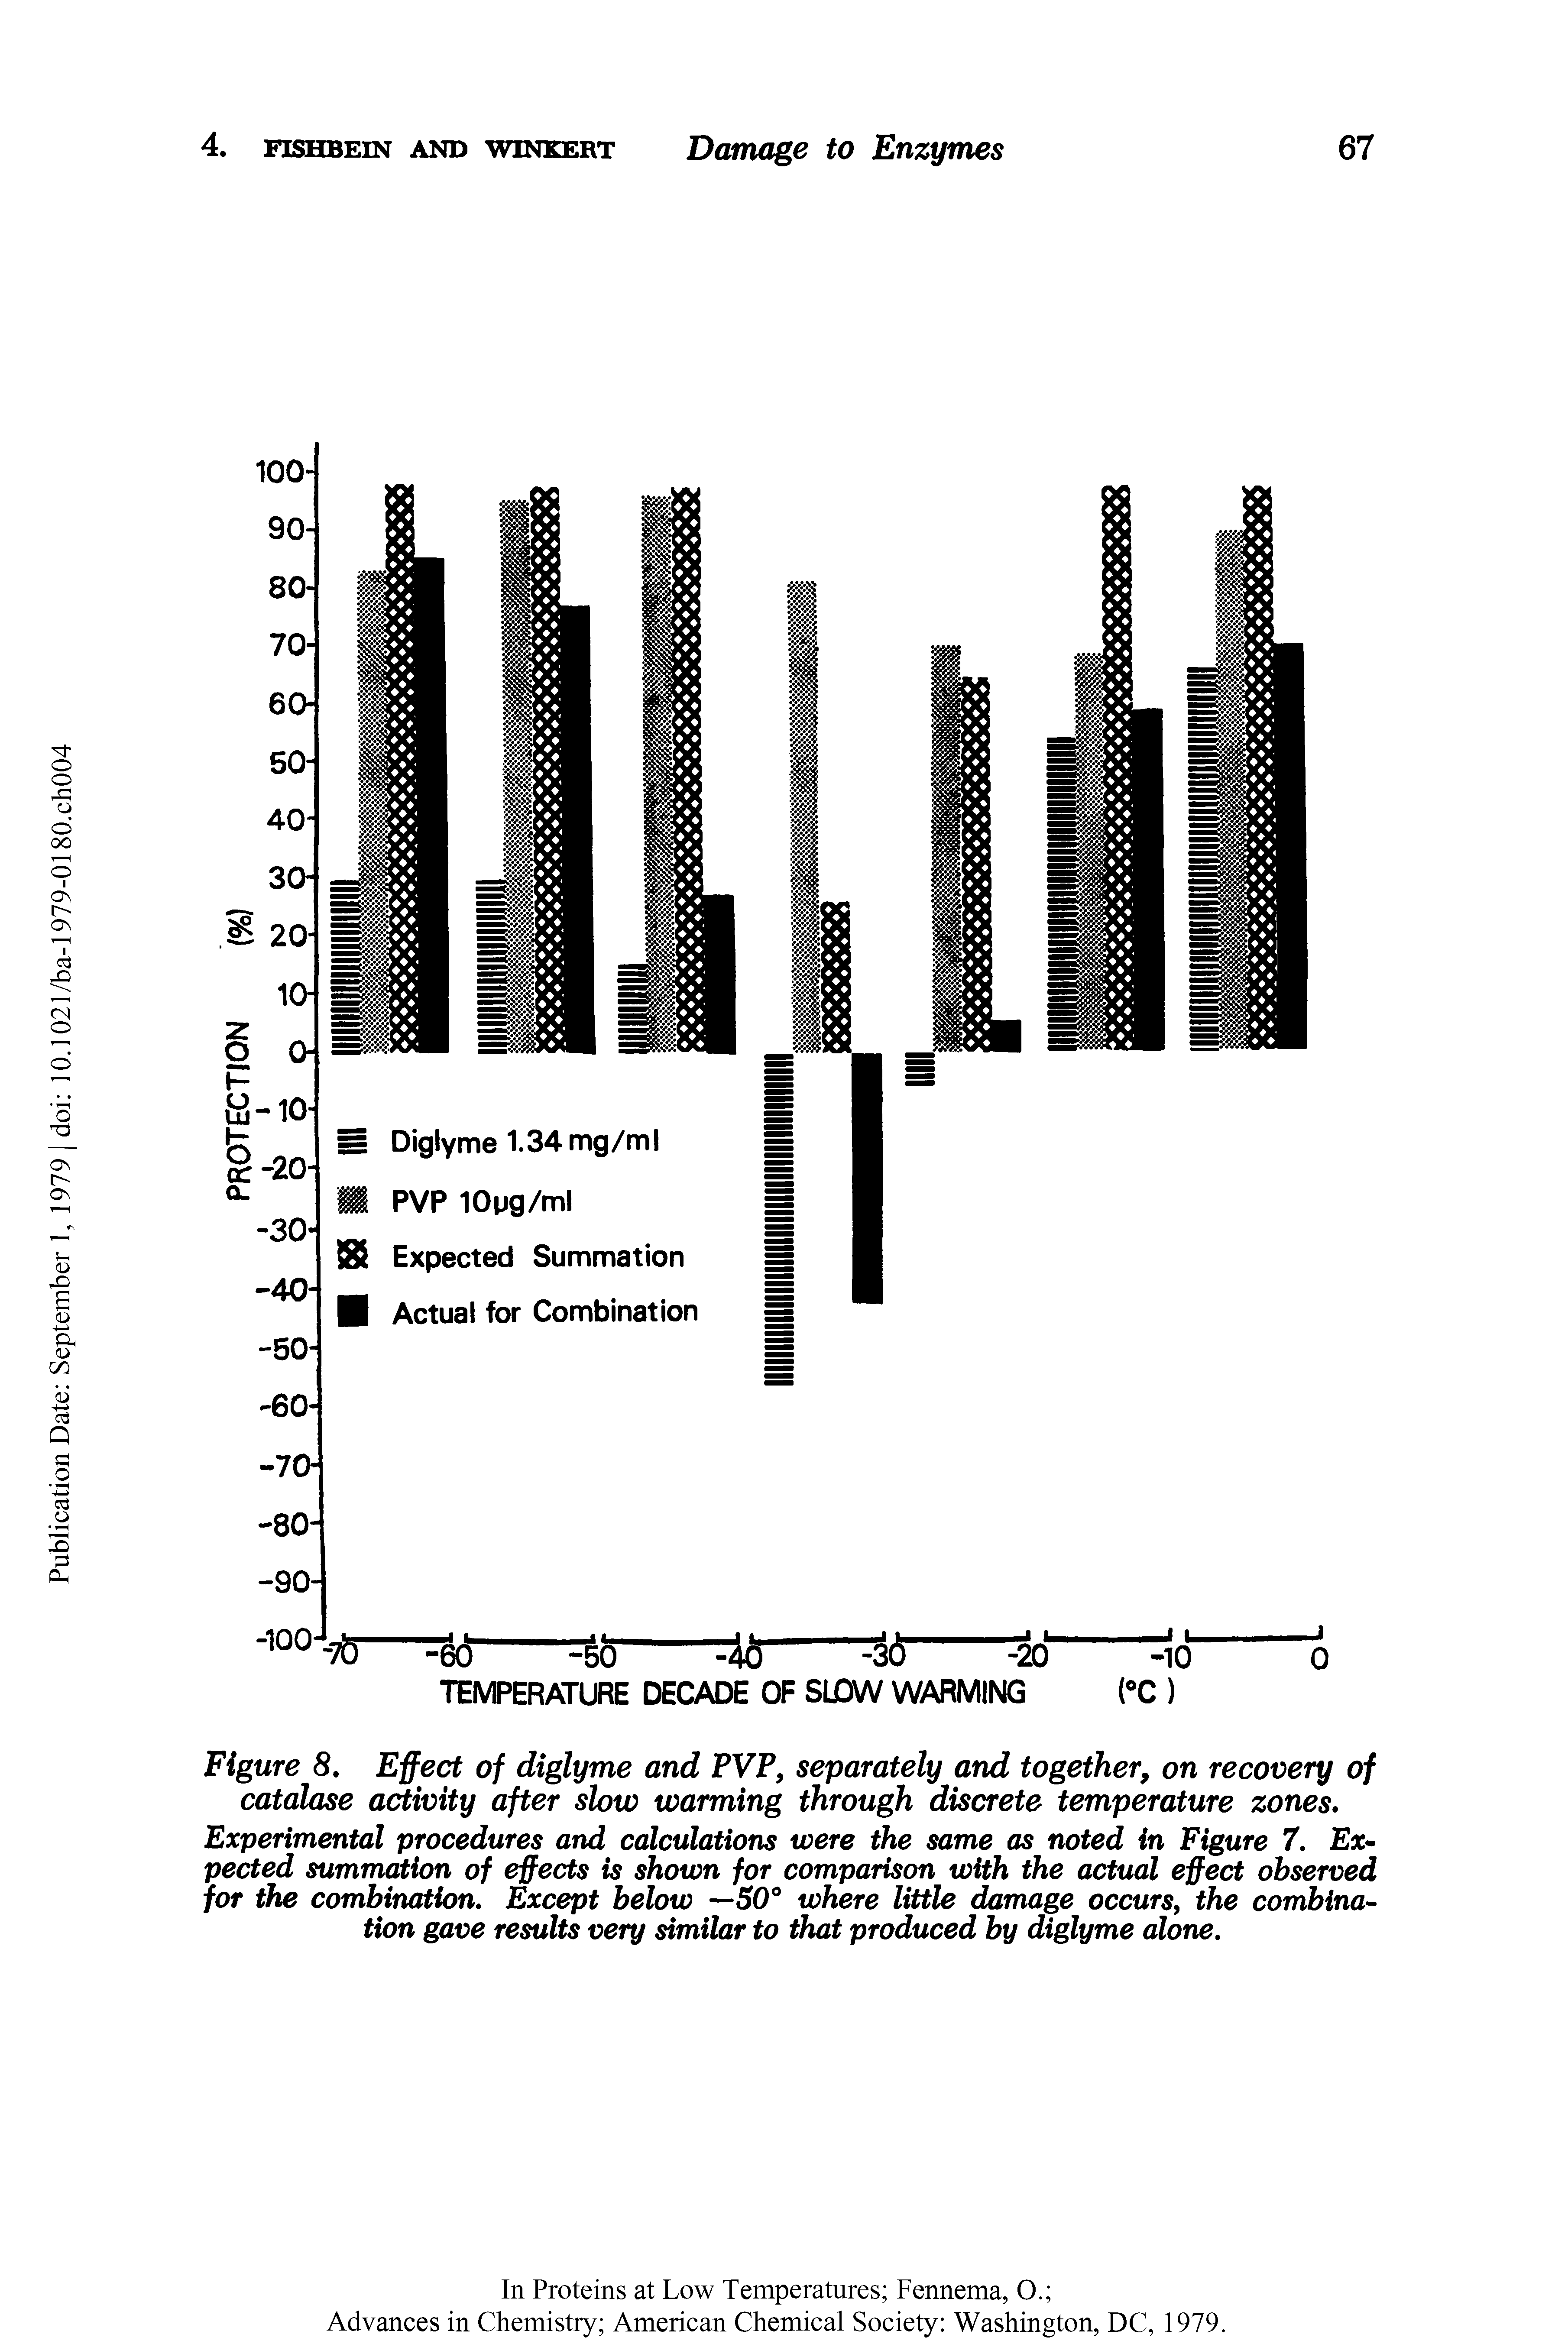 Figure 8. Effect of diglyme and PVP, separately and together, on recovery of catalase activity after slow warming through discrete temperature zones. Experimental procedures and calculations were the same as noted in Figure 7. Expected summation of effects is shown for comparison with the actual effect observed for the combination. Except below —50° where little damage occurs, the combination gave results very similar to that produced by diglyme alone.